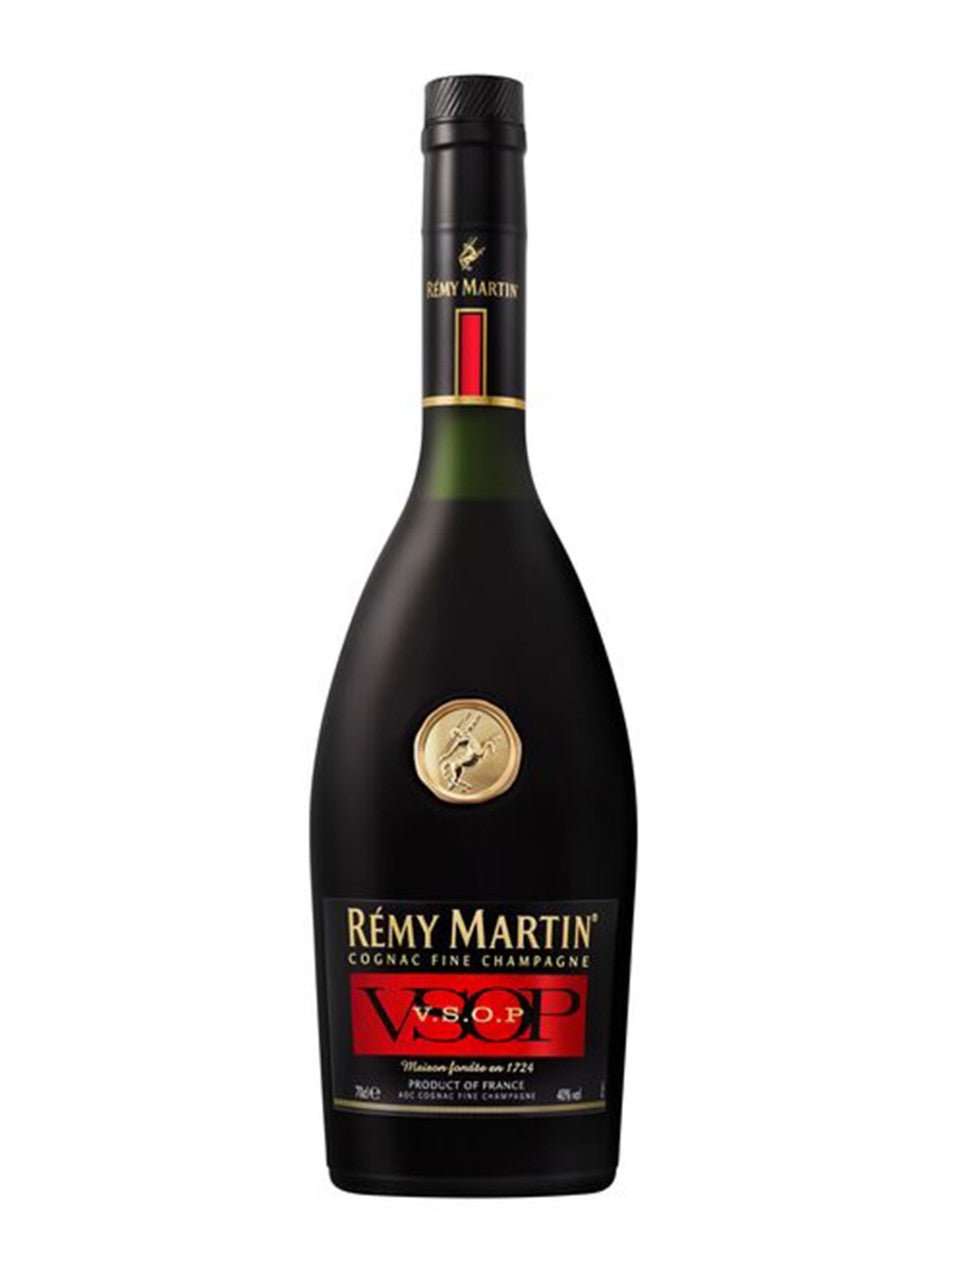 Remy Martin VSOP Cognac | Exquisite Wine & Alcohol Gift Delivery Toronto Canada | Vyno